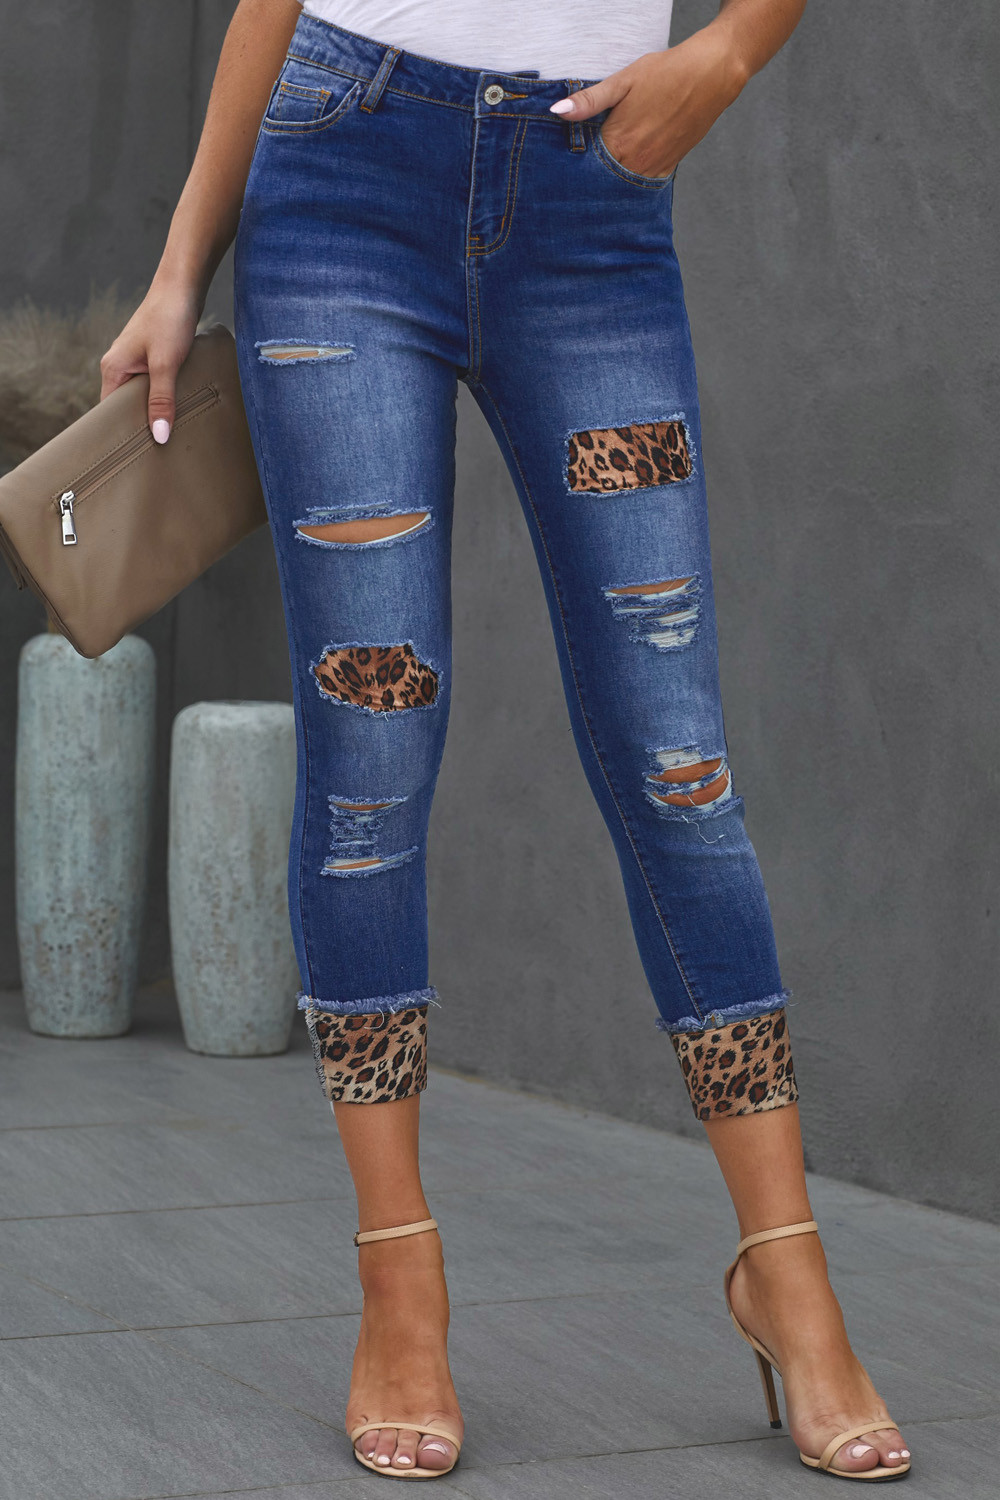 US$ 12.08 Dropship Distressed Leopard Patches Blue Skinny Jeans